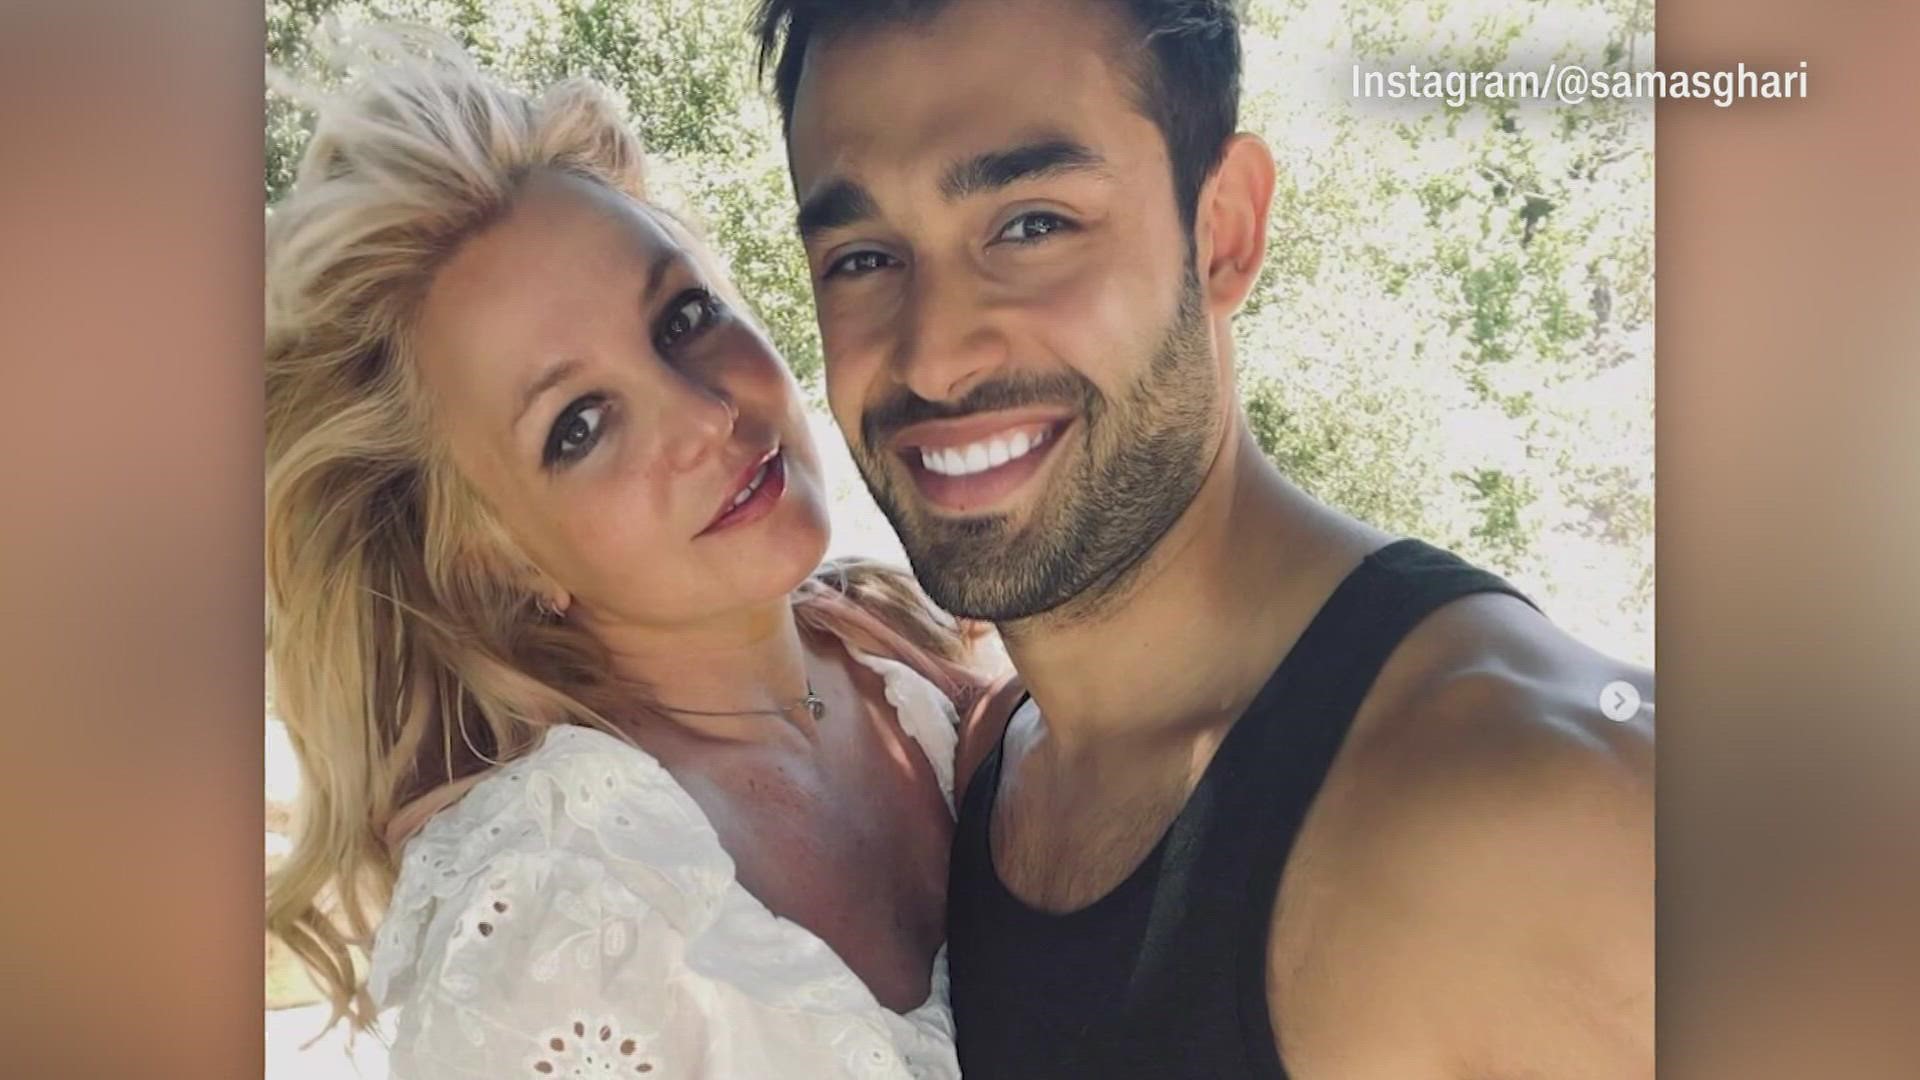 Britney Spears has married Sam Asghari at a Southern California ceremony that came months after the pop superstar won her freedom from a conservatorship.